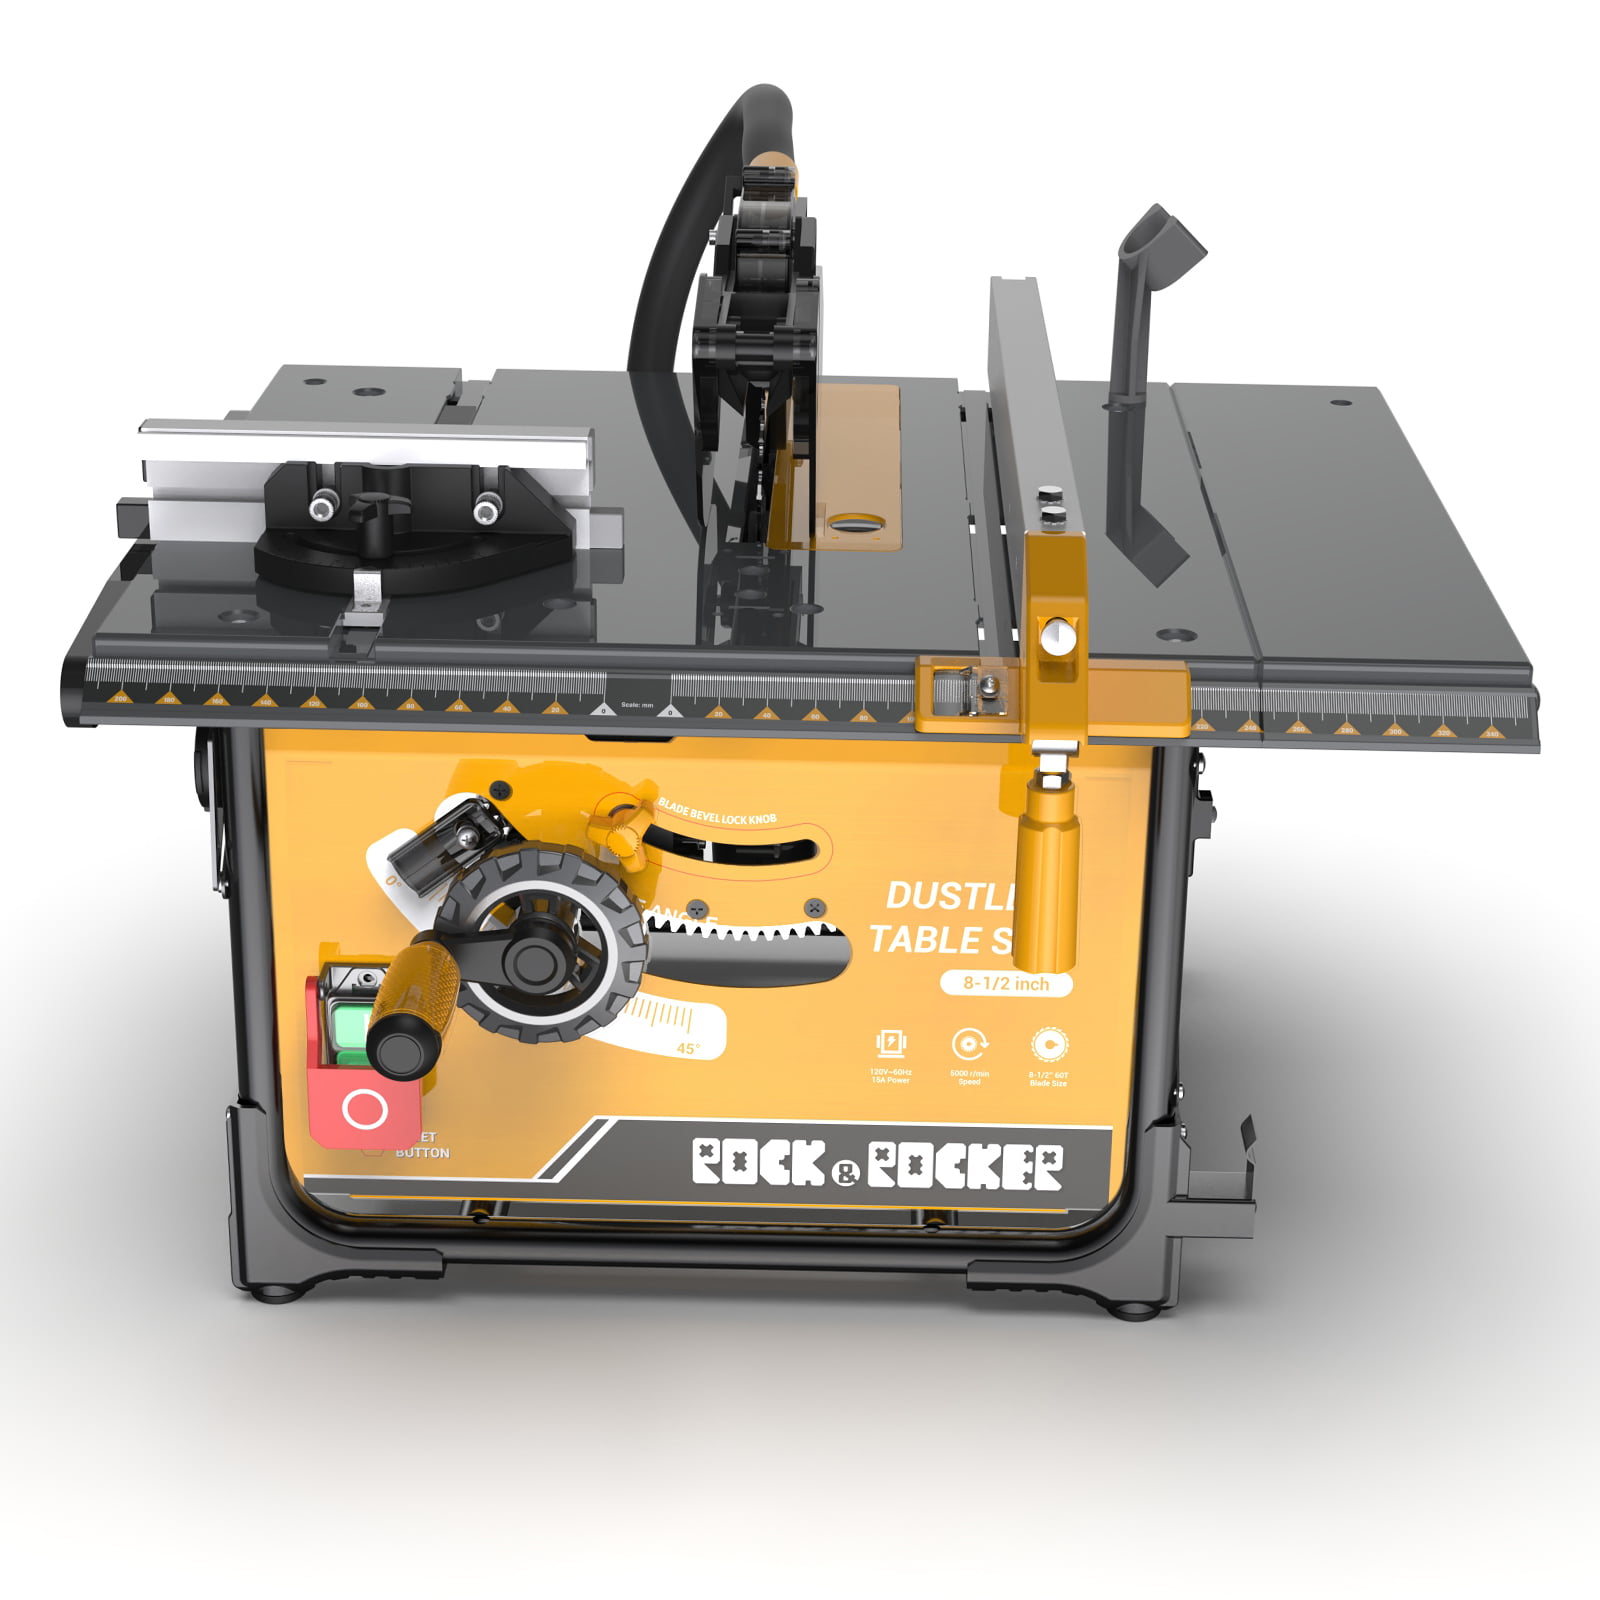 Black+Decker Portable Table Saws Made by Rexon Recalled Due to